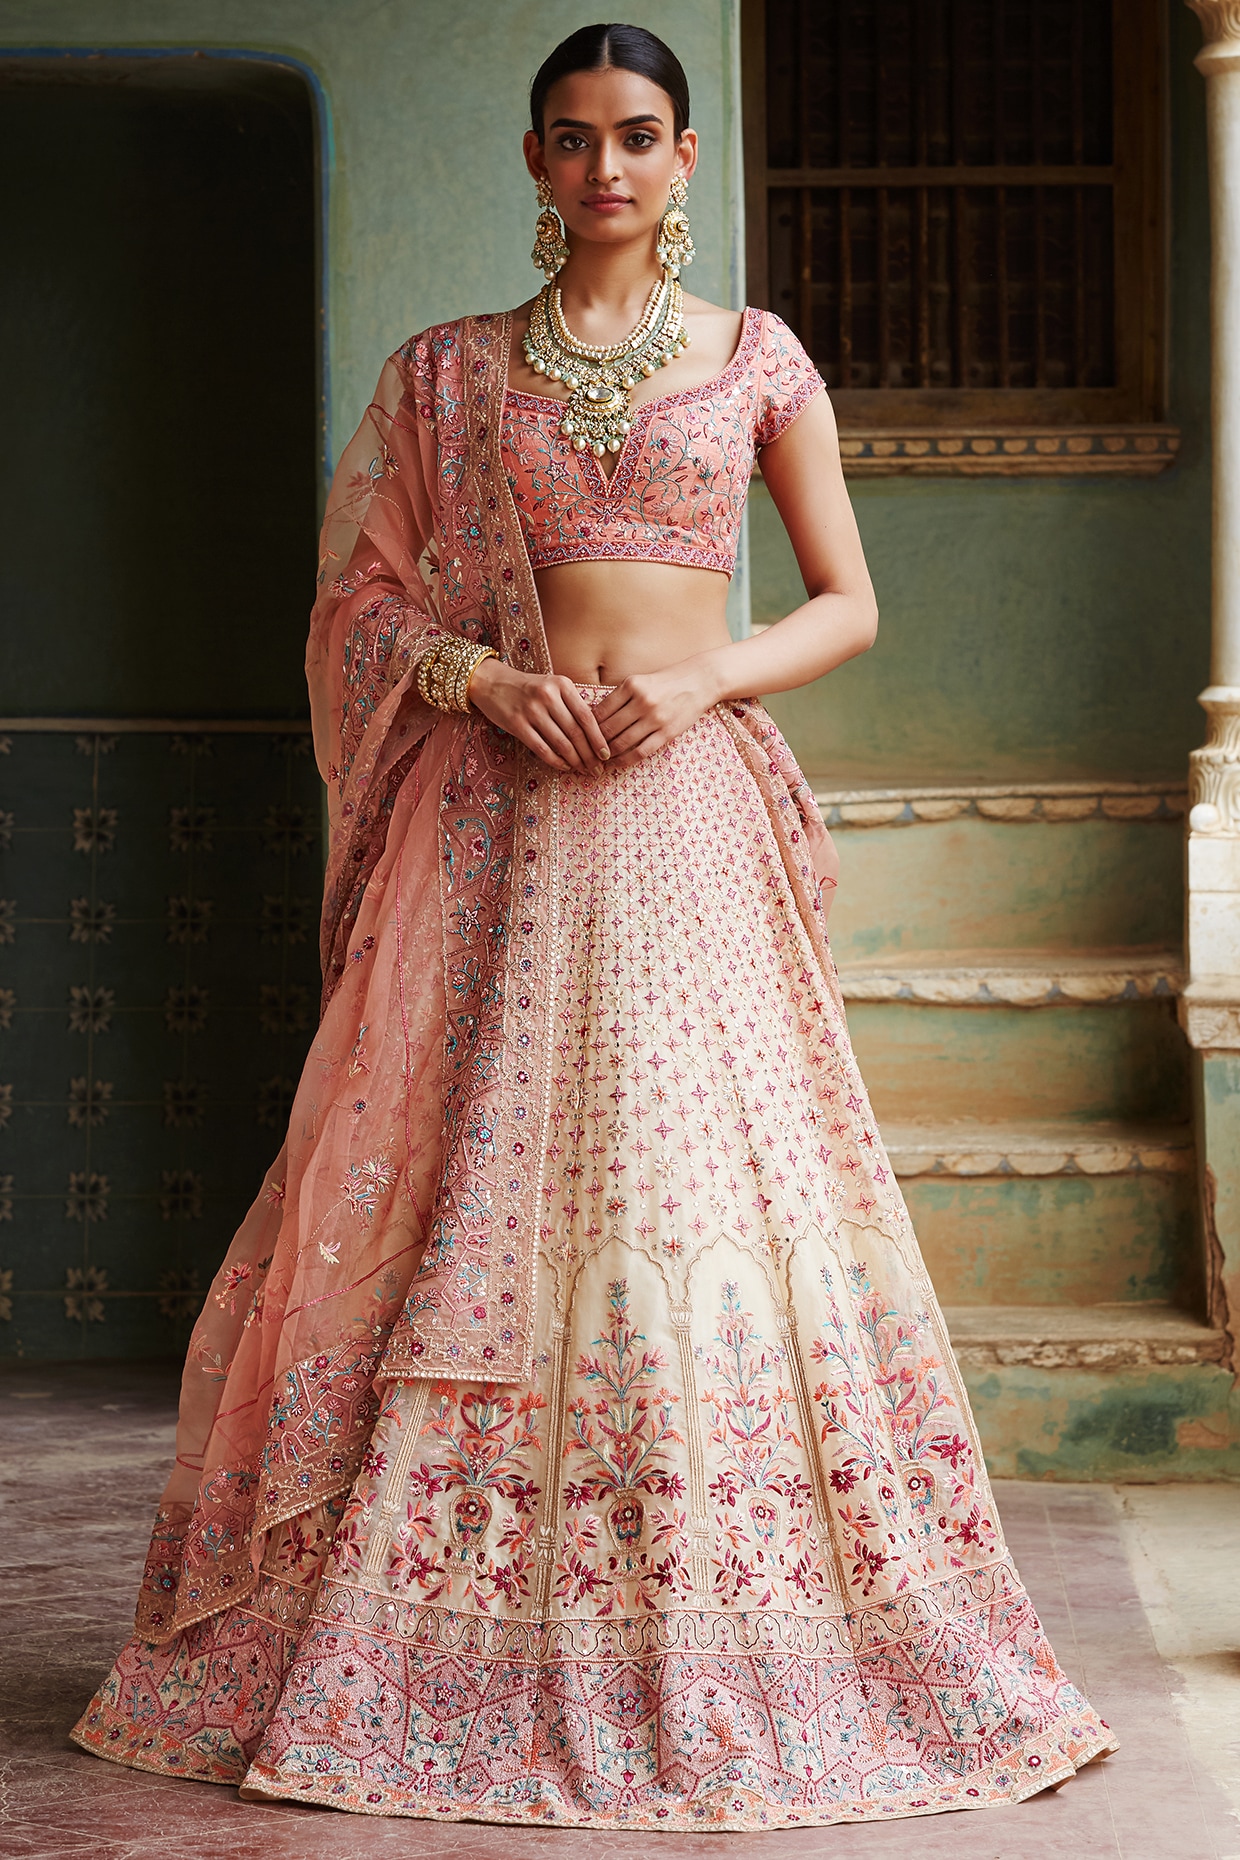 Exquisite Embroidered Lehenga by Rahul Mishra - Indian Couture 2020